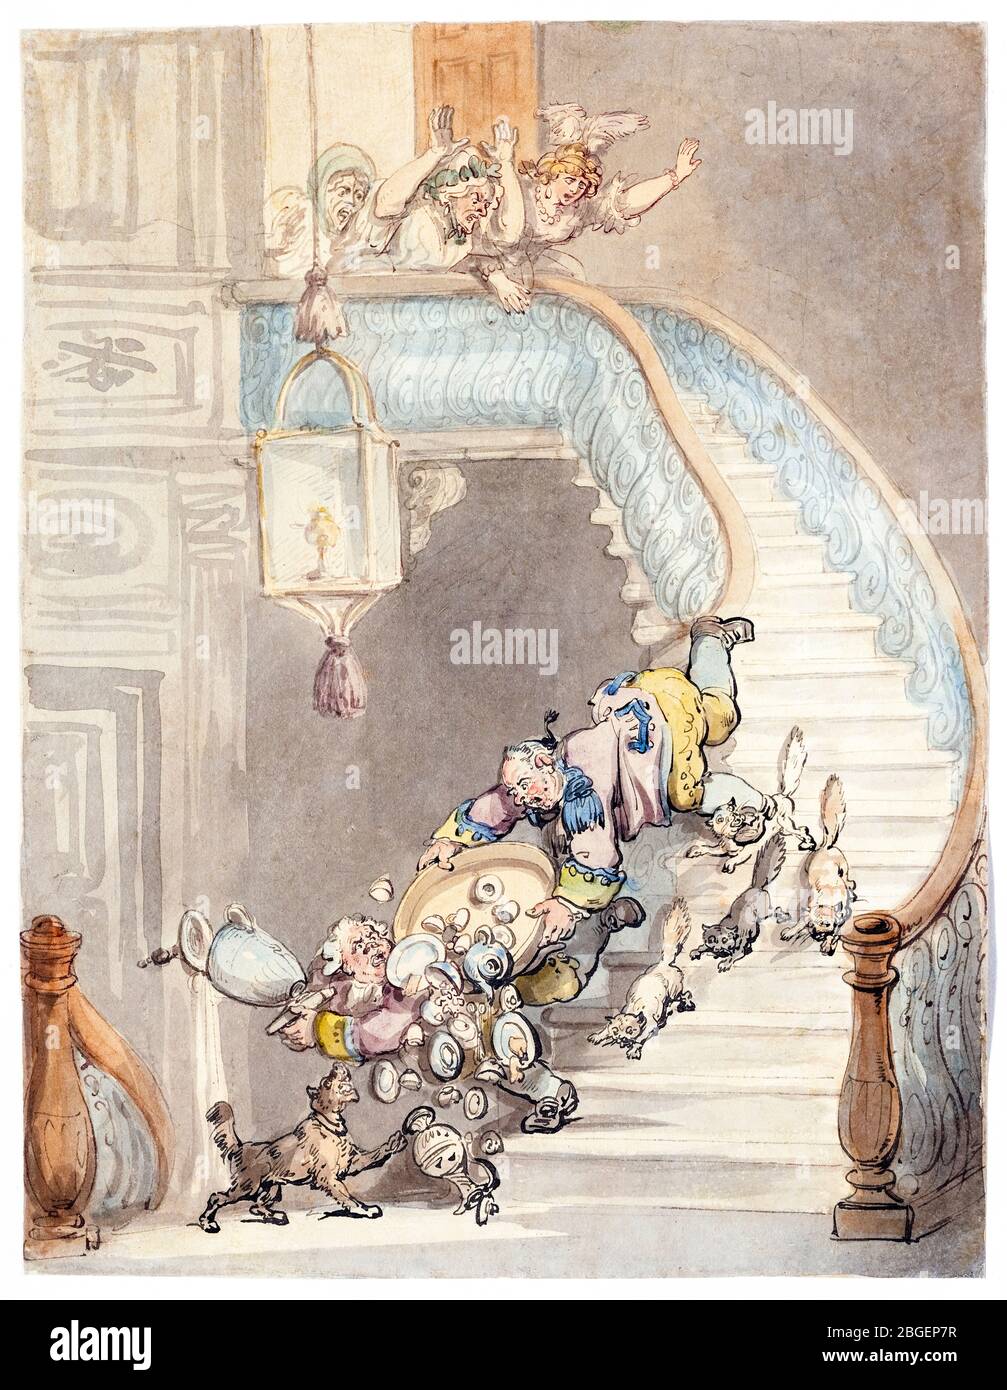 Thomas Rowlandson, The Cat-Astrophy or Crash To My Grandmother's Old China, drawing circa 1800 Stock Photo